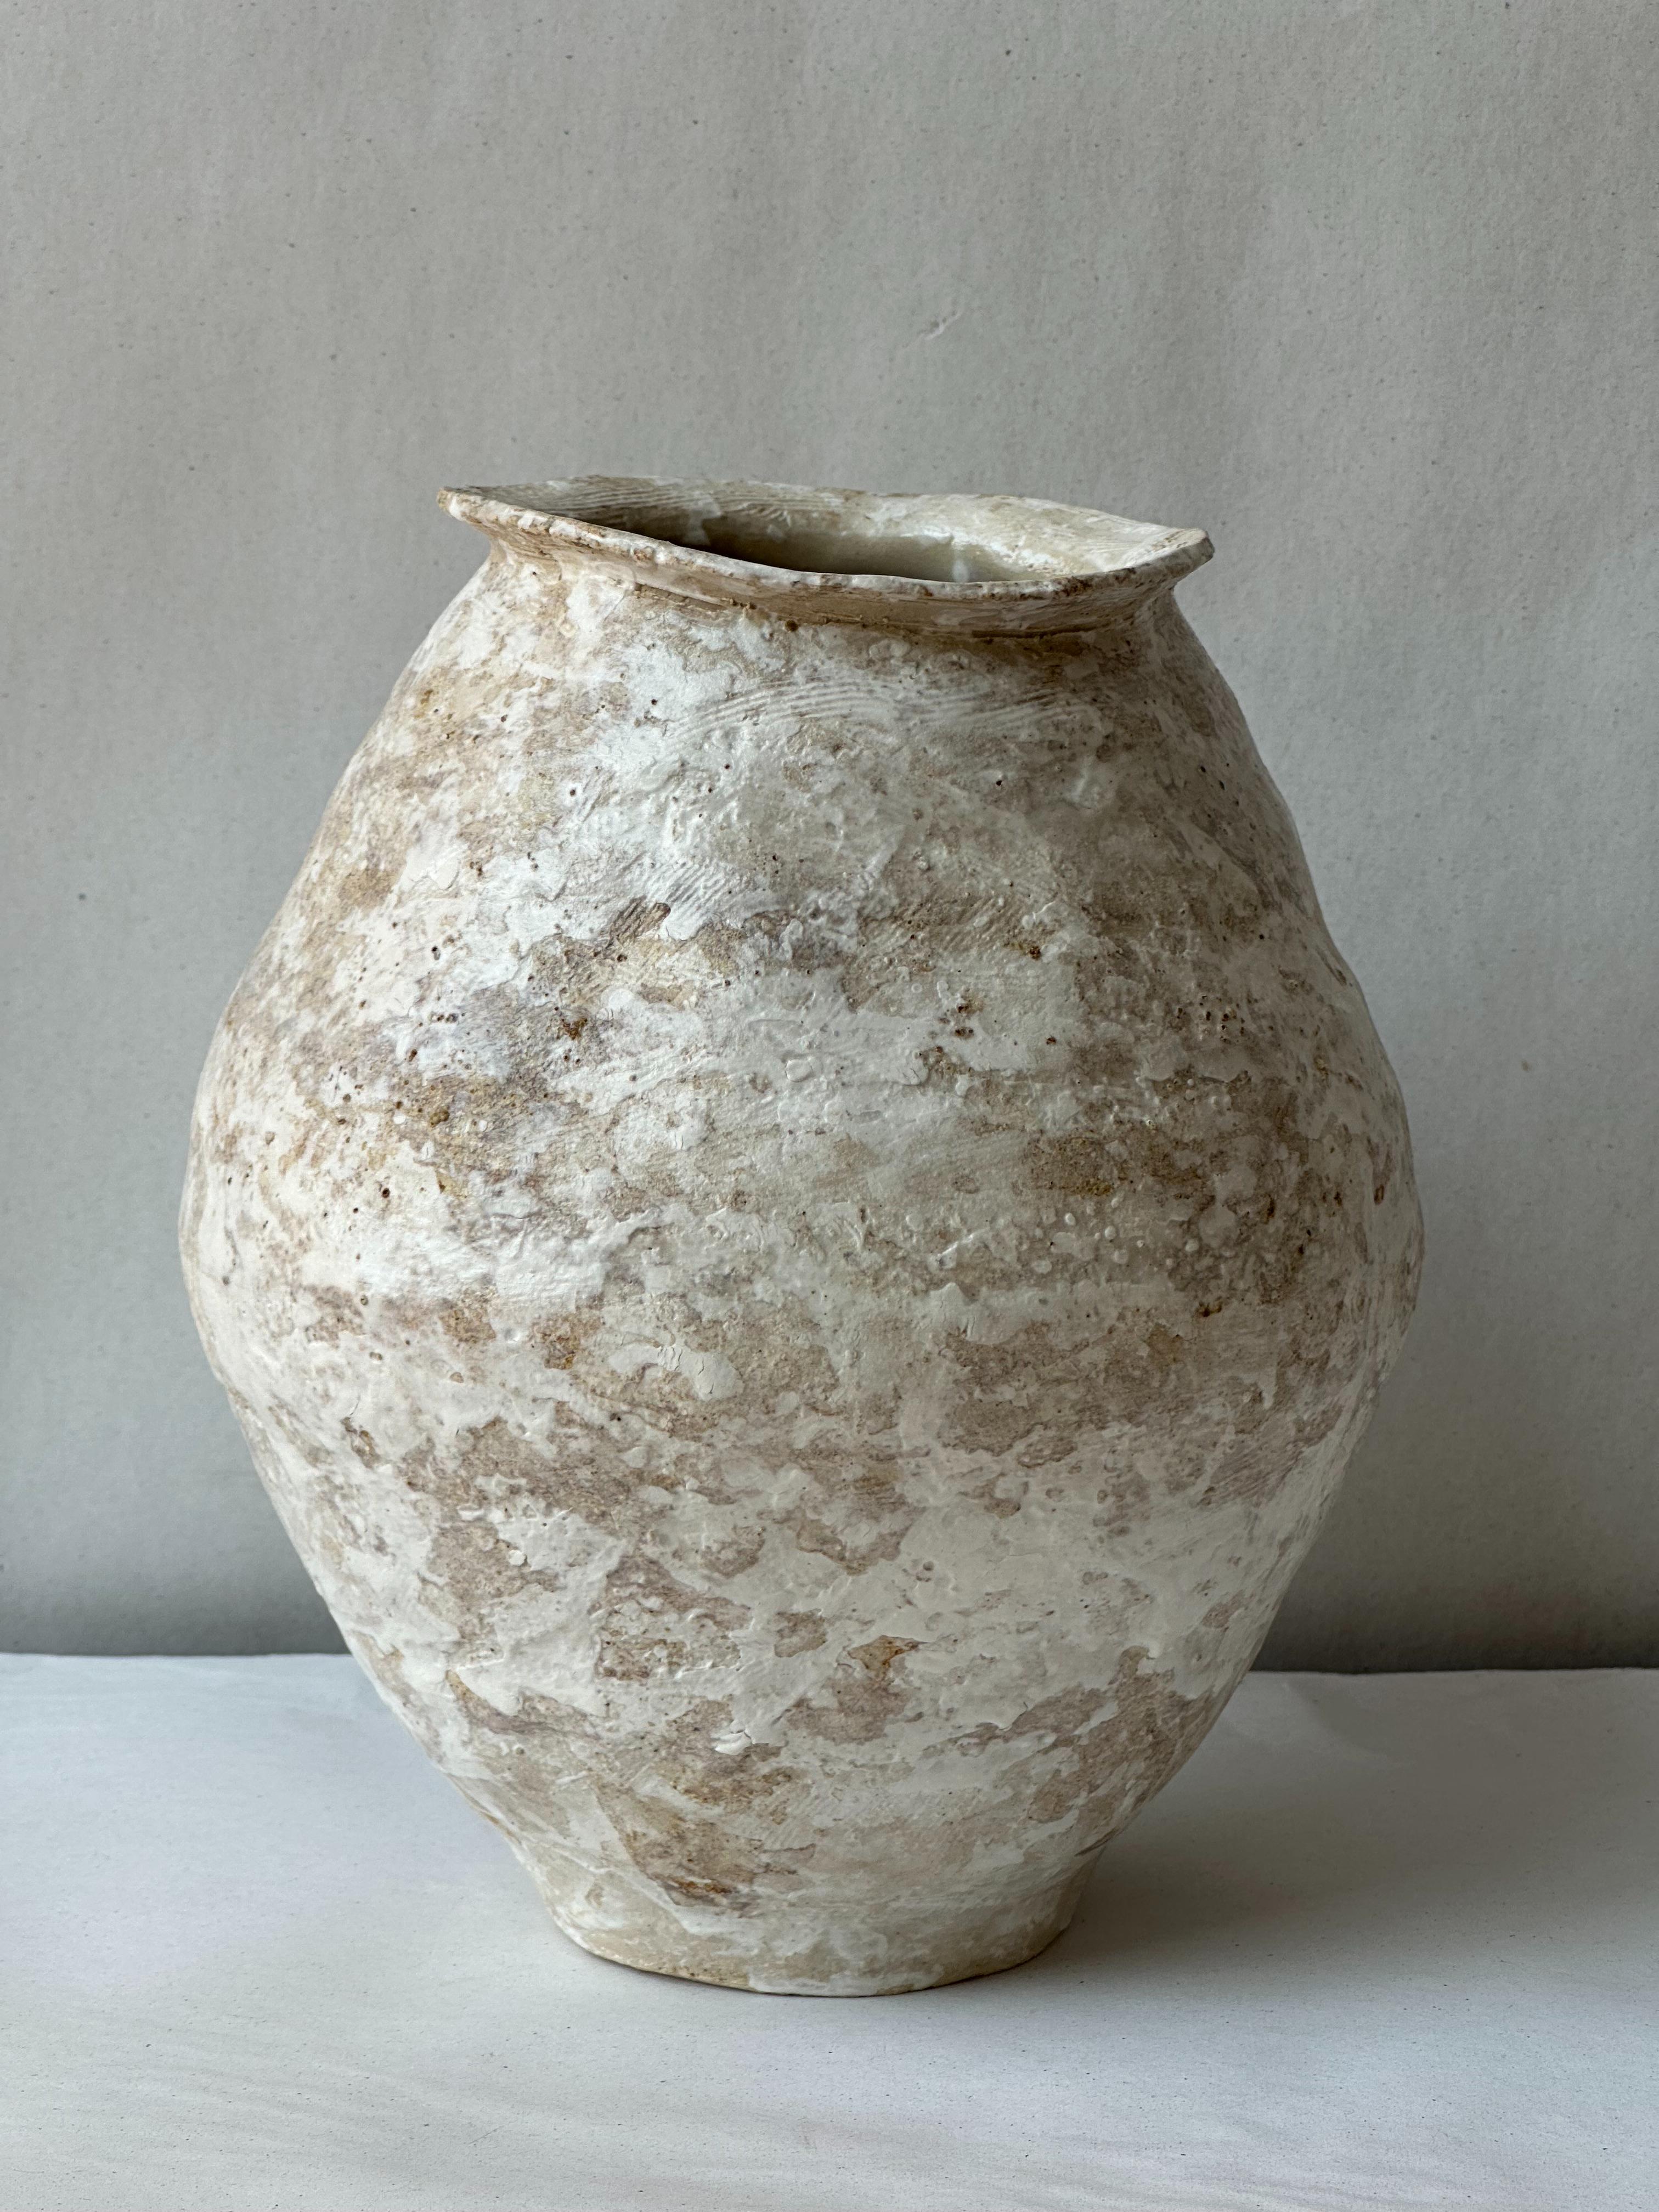 Beige Stoneware Sfondyli I Vase by Elena Vasilantonaki
Unique
Dimensions: ⌀ 30 x H 25 cm (Dimensions may vary)
Materials: Stoneware
Available finishes: Black, Beige, Brown, Red, White Patina

Growing up in Greece I was surrounded by pottery forms